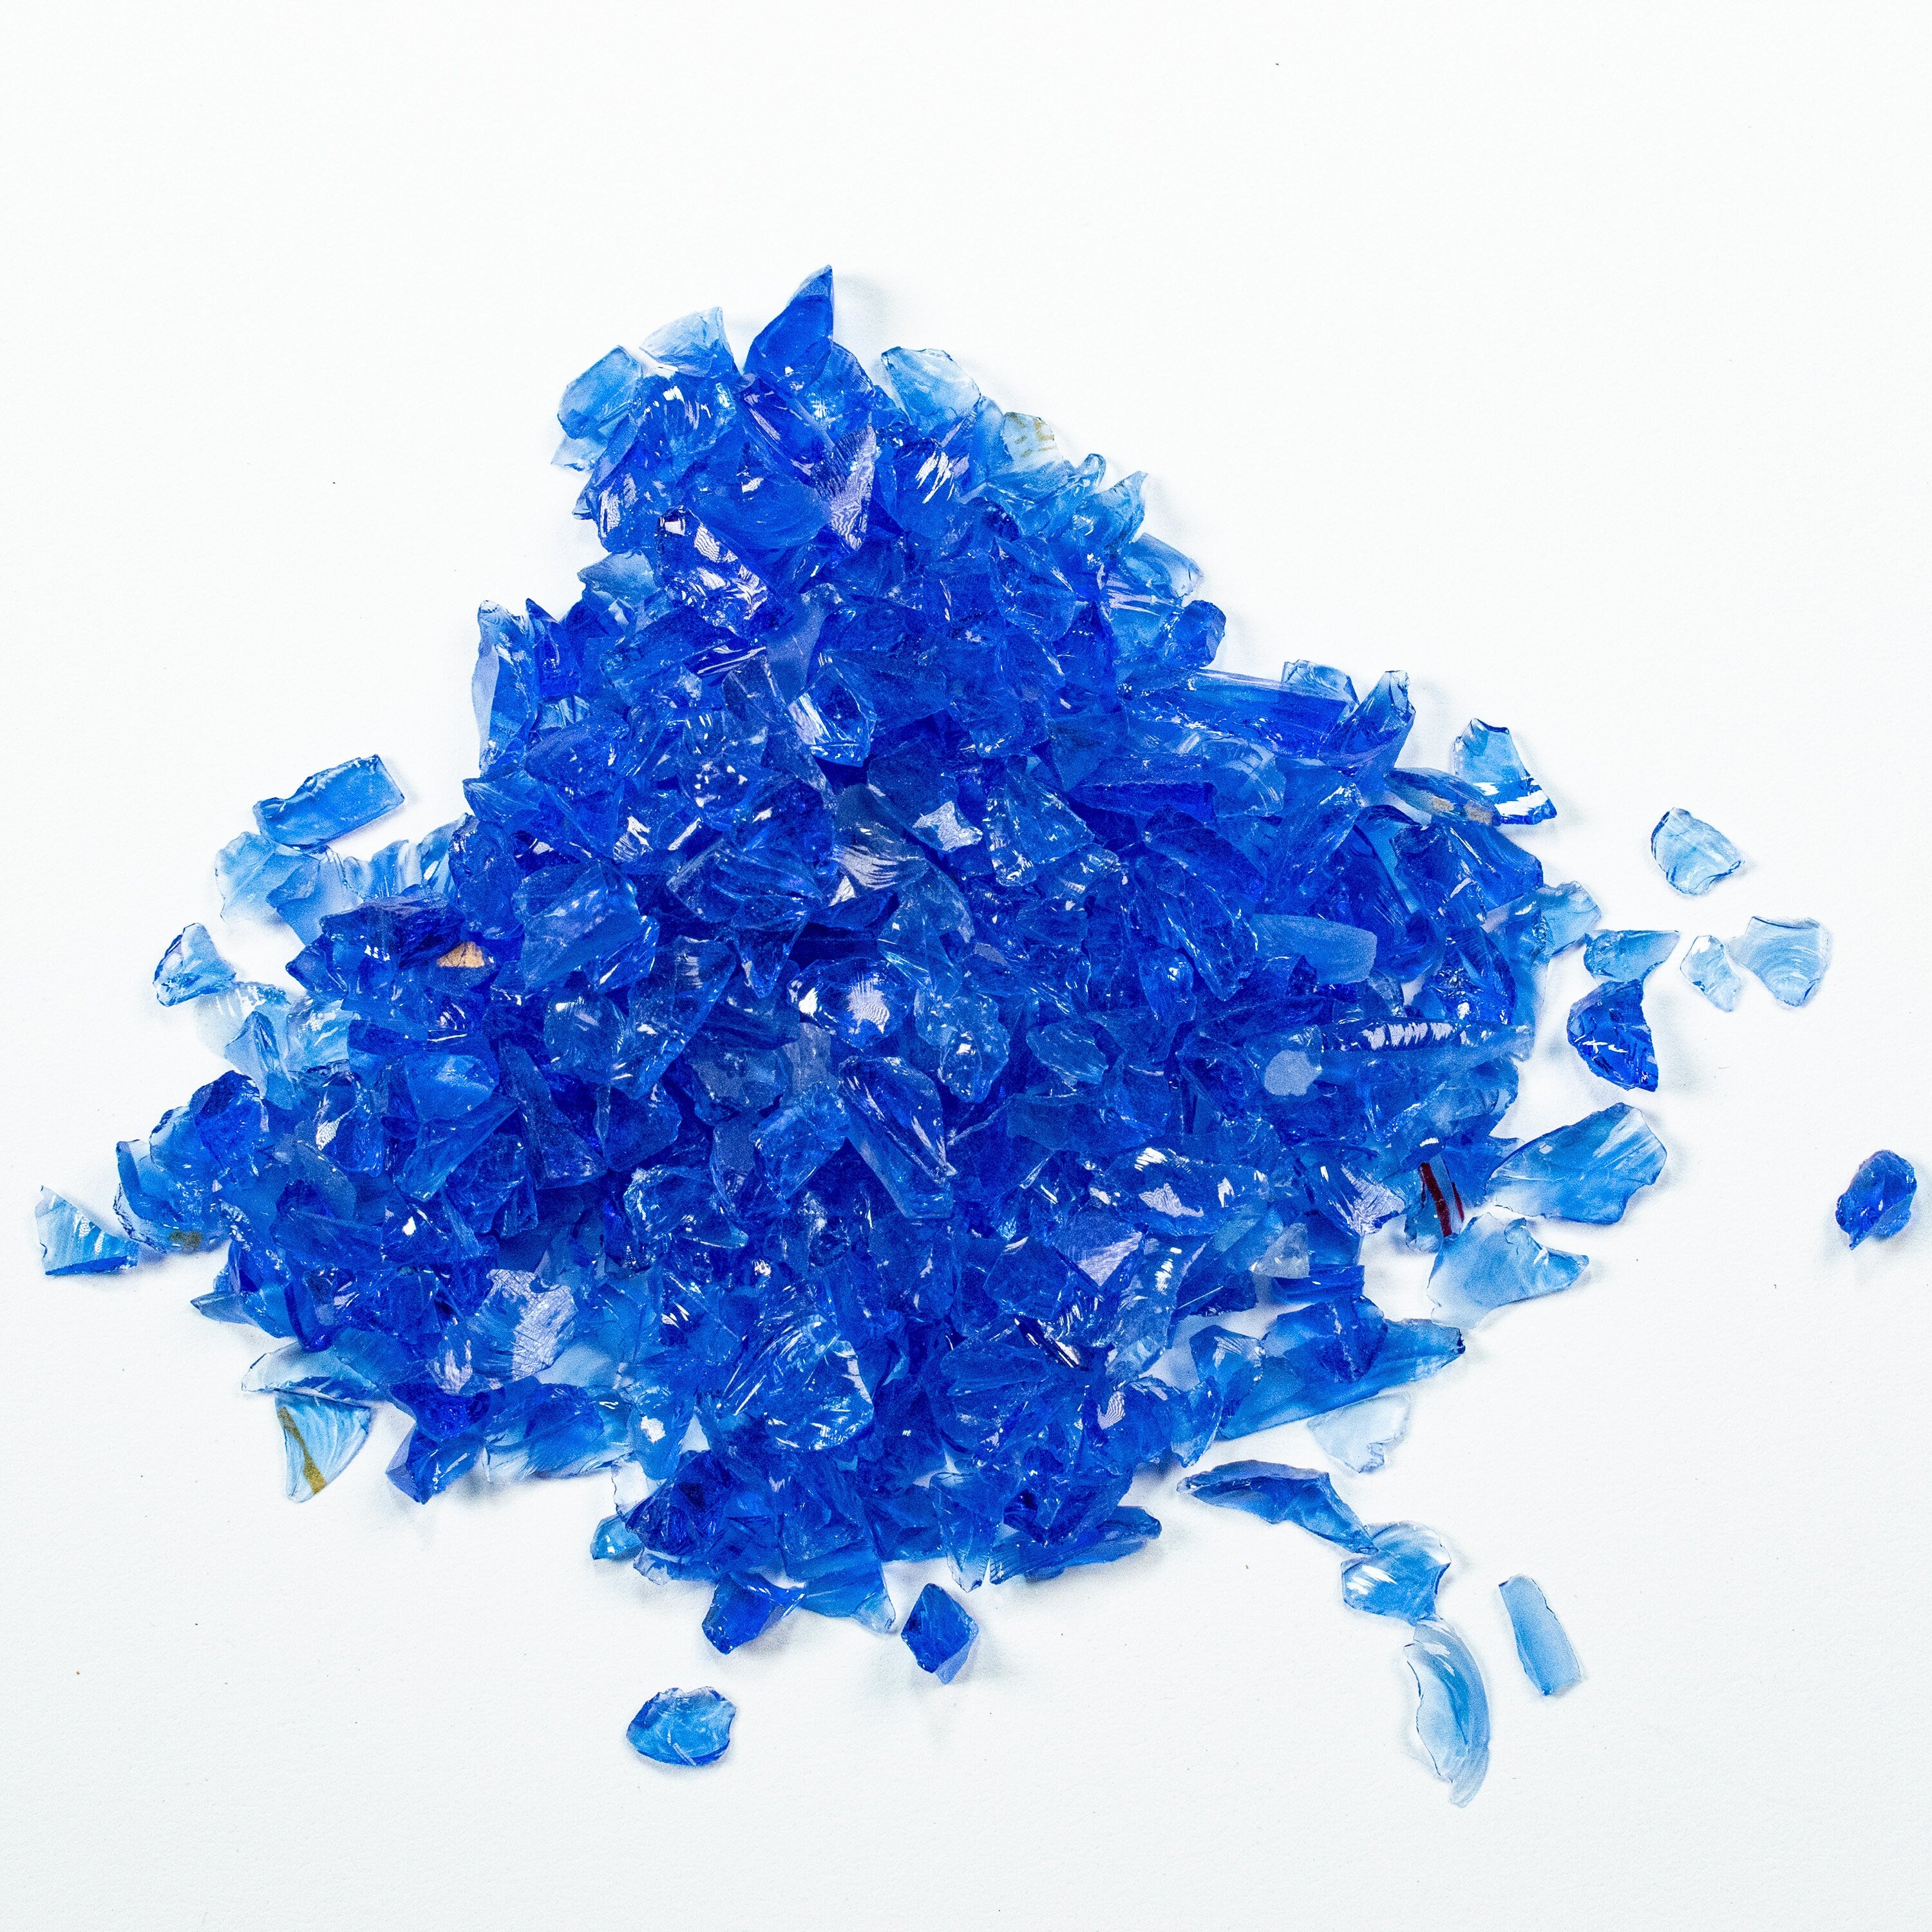 Crushed Glass in 2 - 4 mm Pieces for use in Artwork, Epoxy, Resin, Vase Fillers, Weddings, Table Scatter, Fire Pits and many other projects